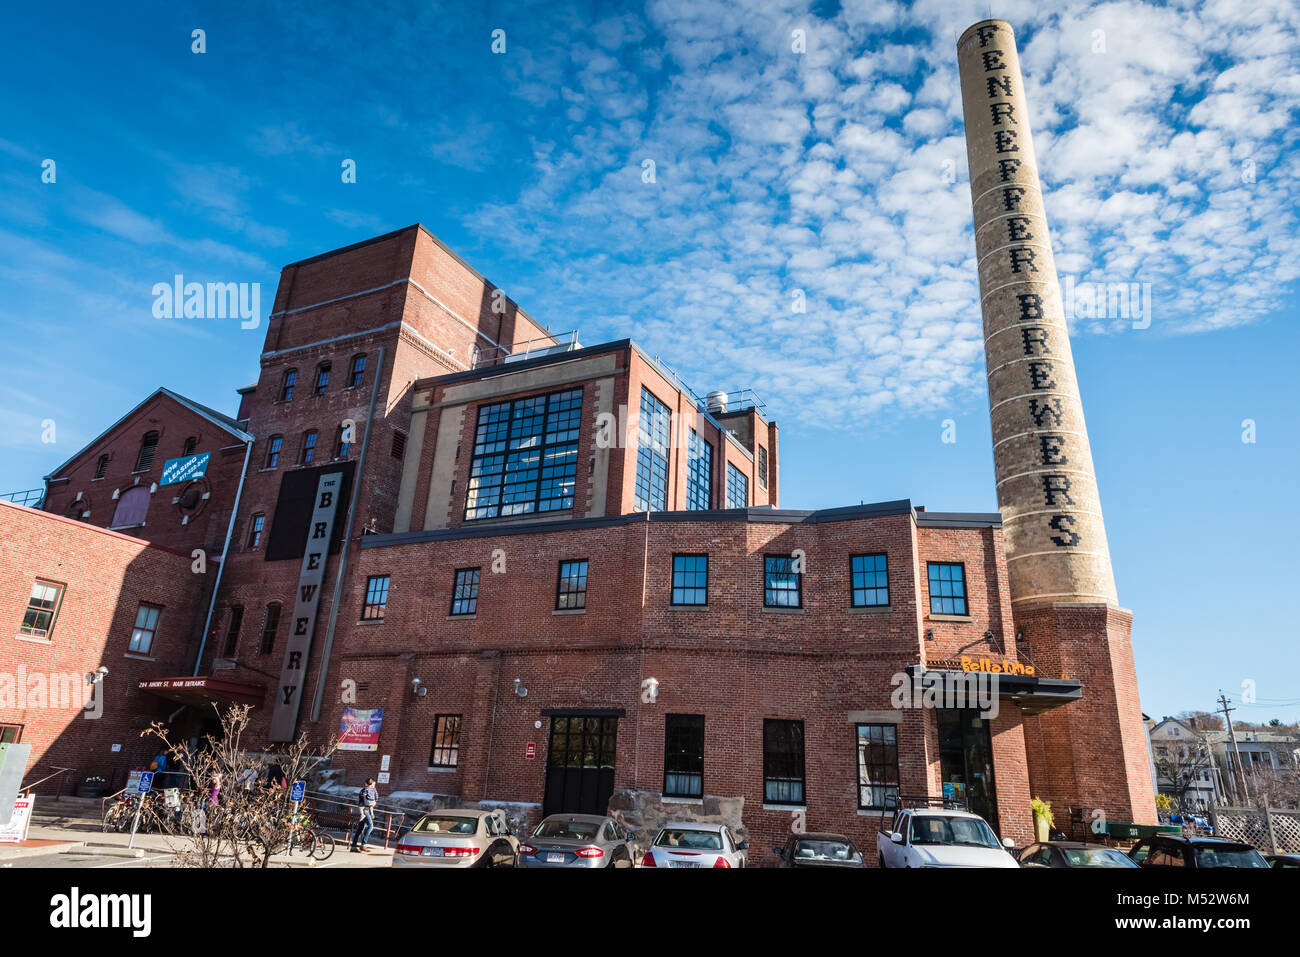 Well-known brewery with a long history lures locals & visitors with tours, tastings & a gift shop at its brewhouse in Boston, Massachusetts Stock Photo